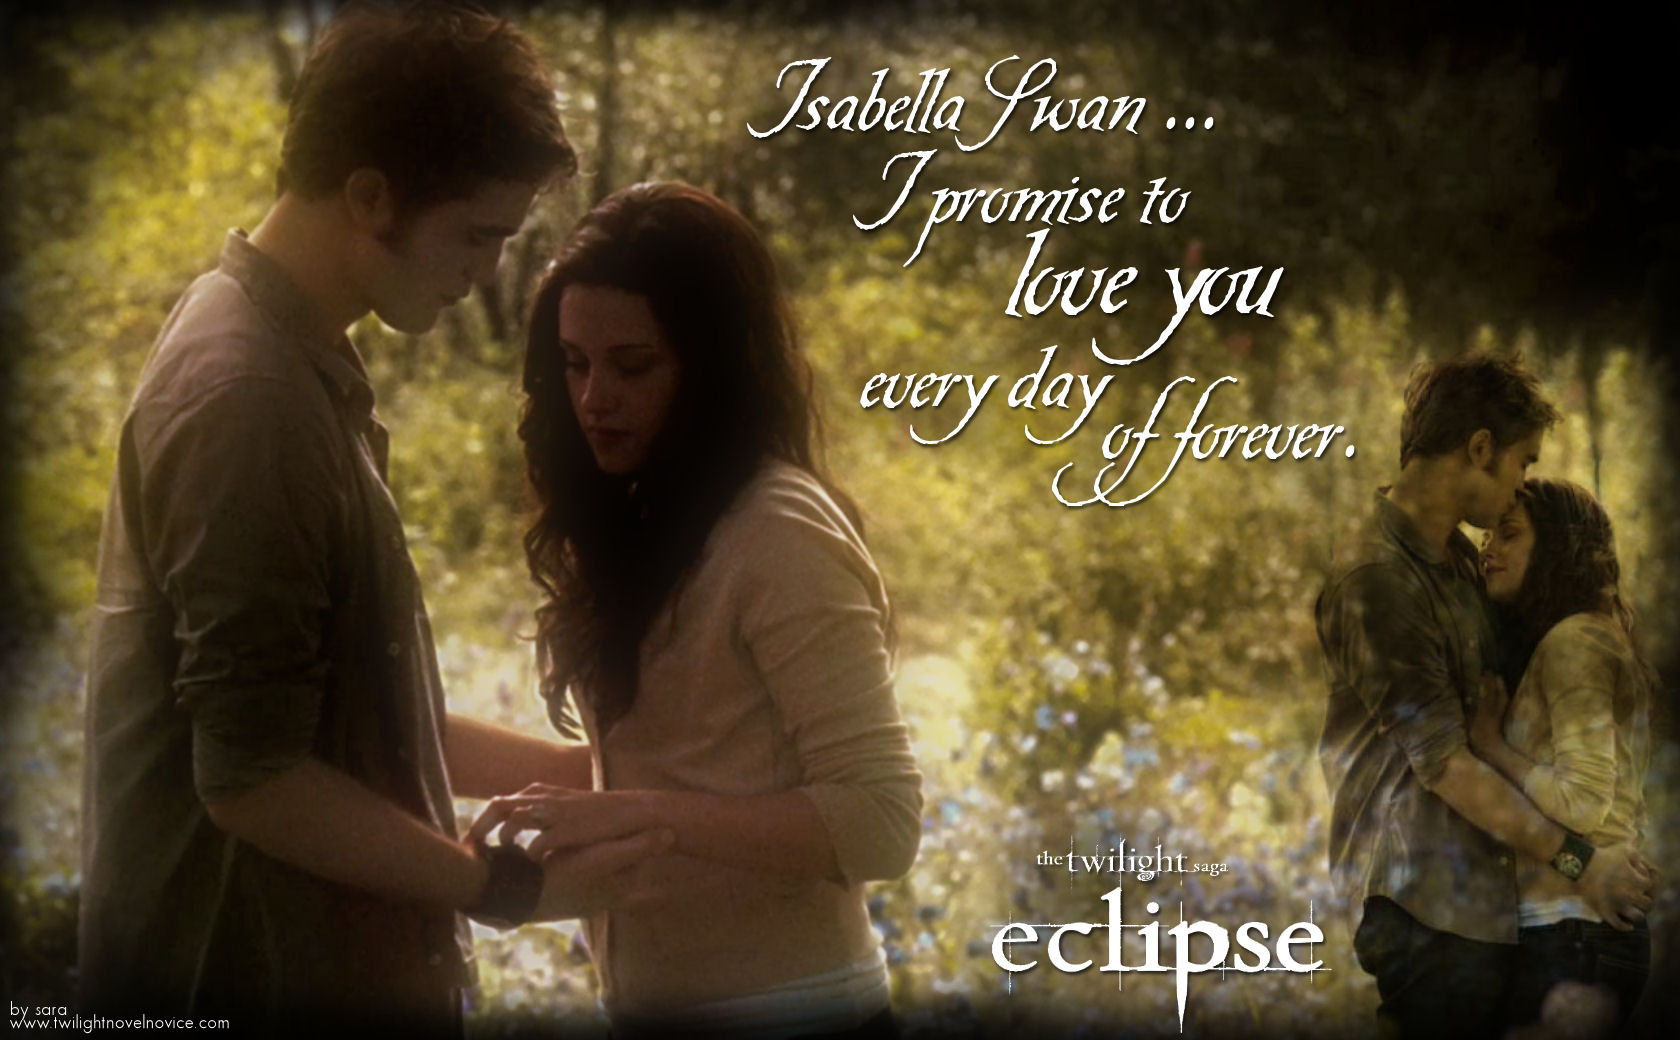 Eclipse Day Of Forever